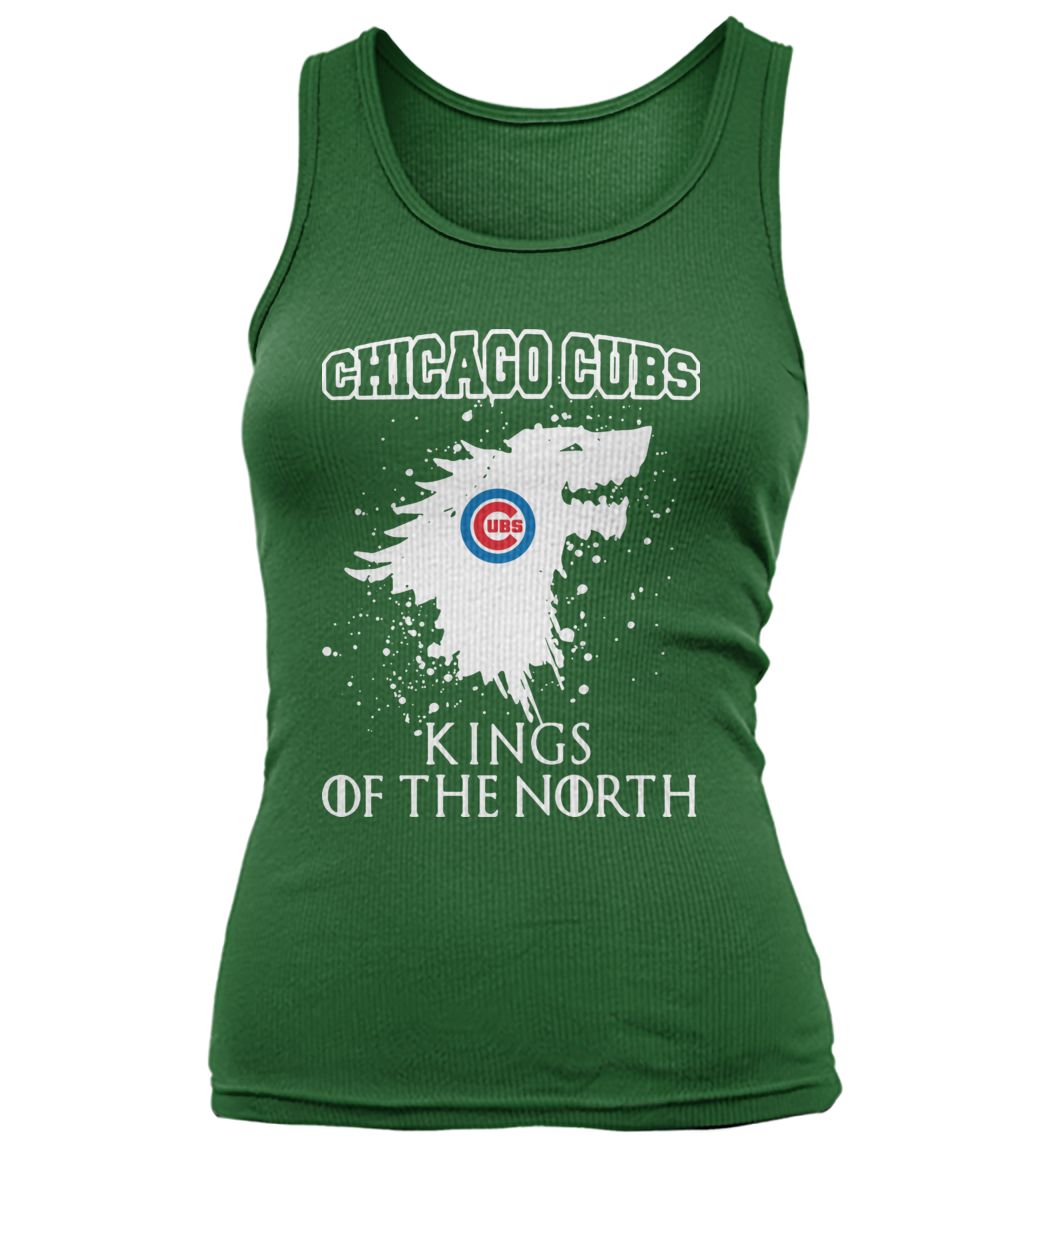 Game of thrones house stark chicago cubs kings of the north women's tank top